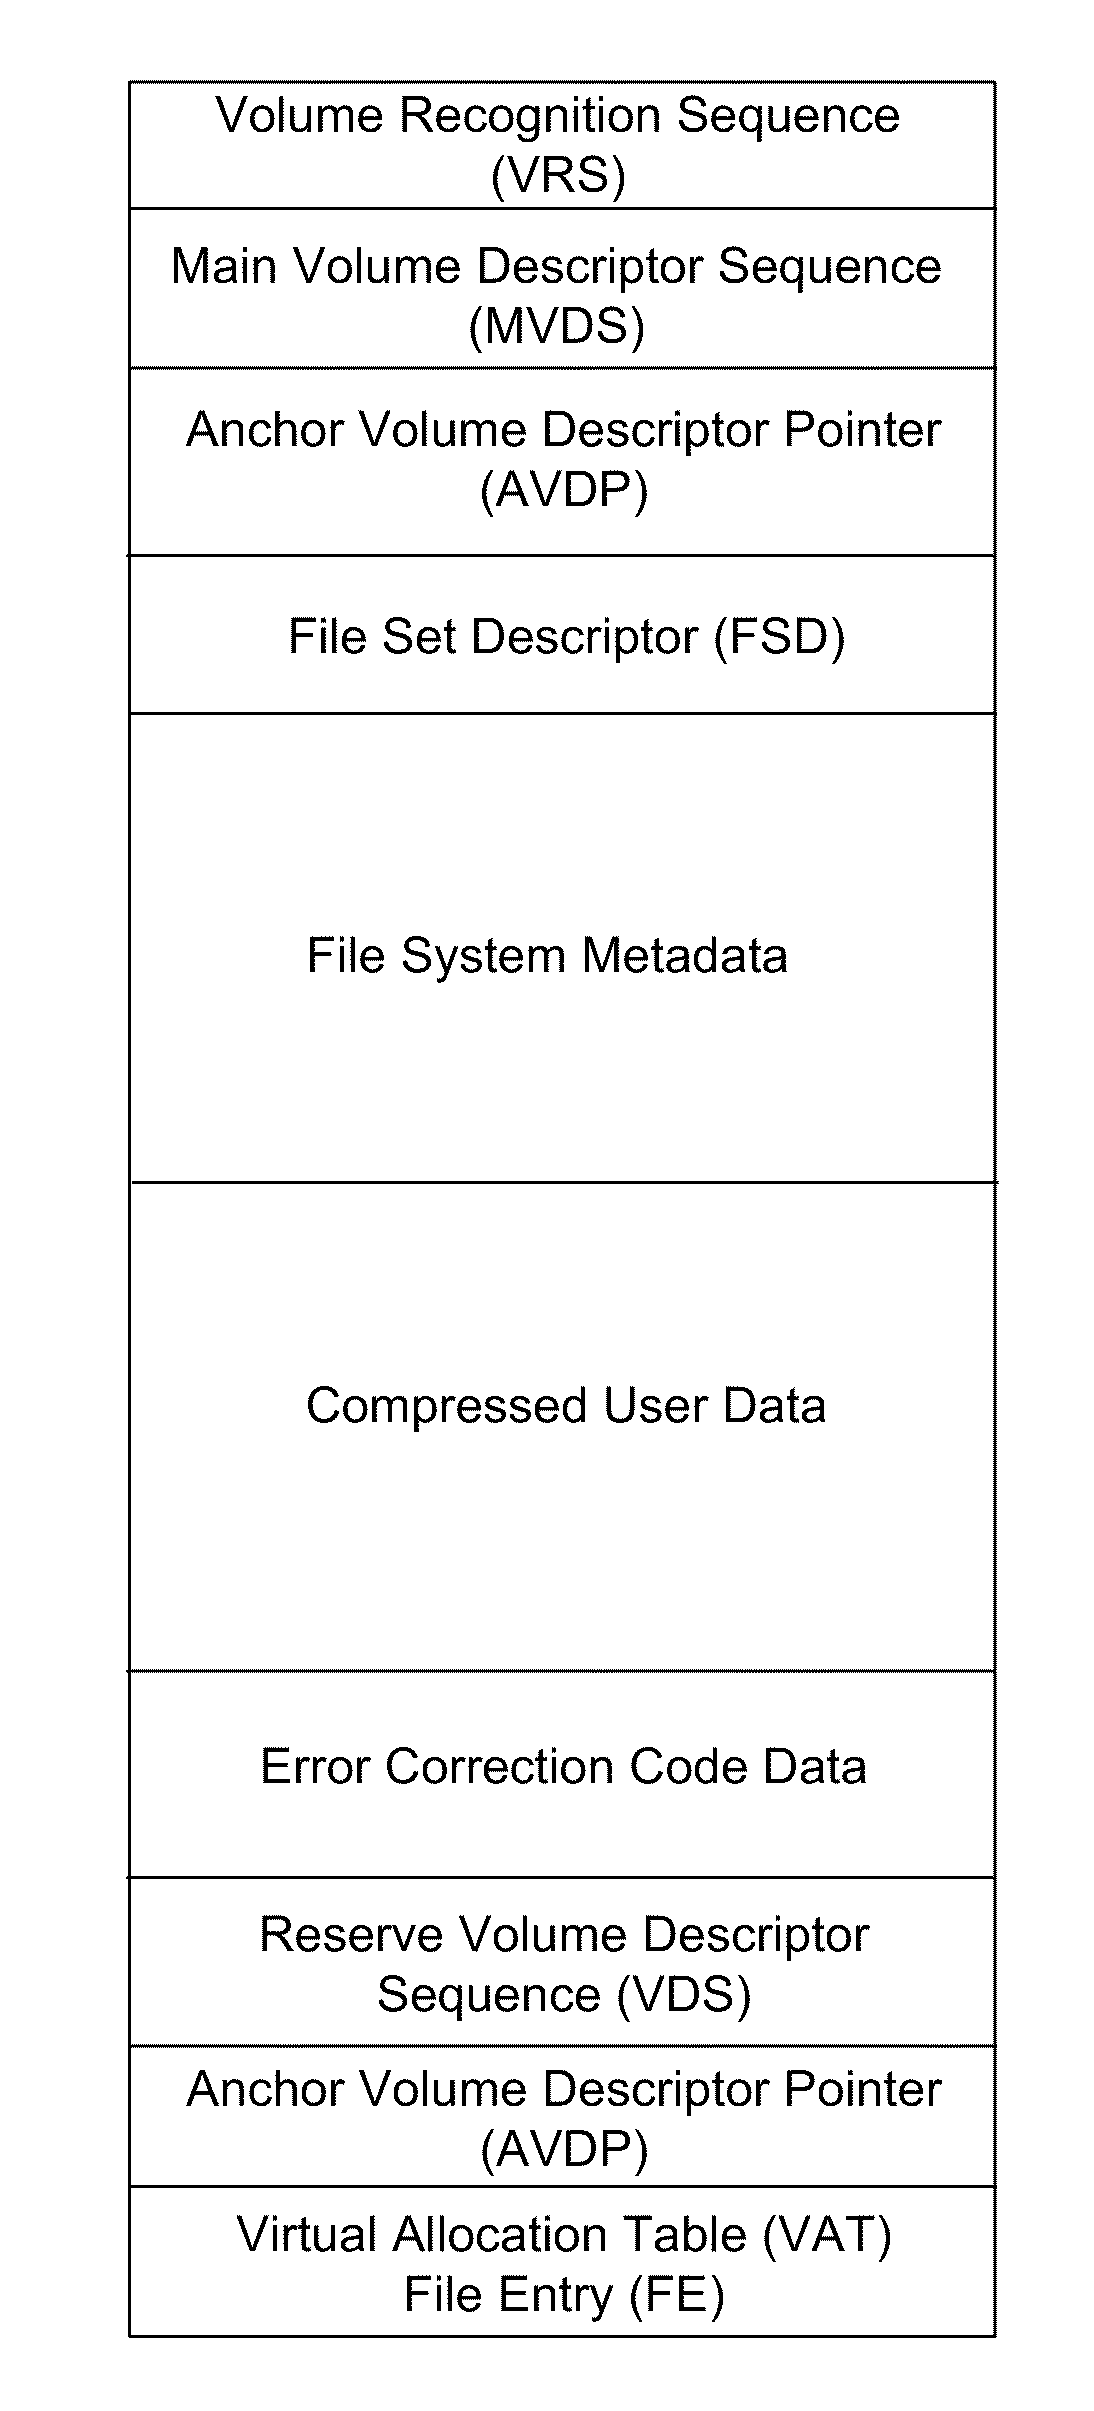 Accessing, compressing, and tracking media stored in an optical disc storage system